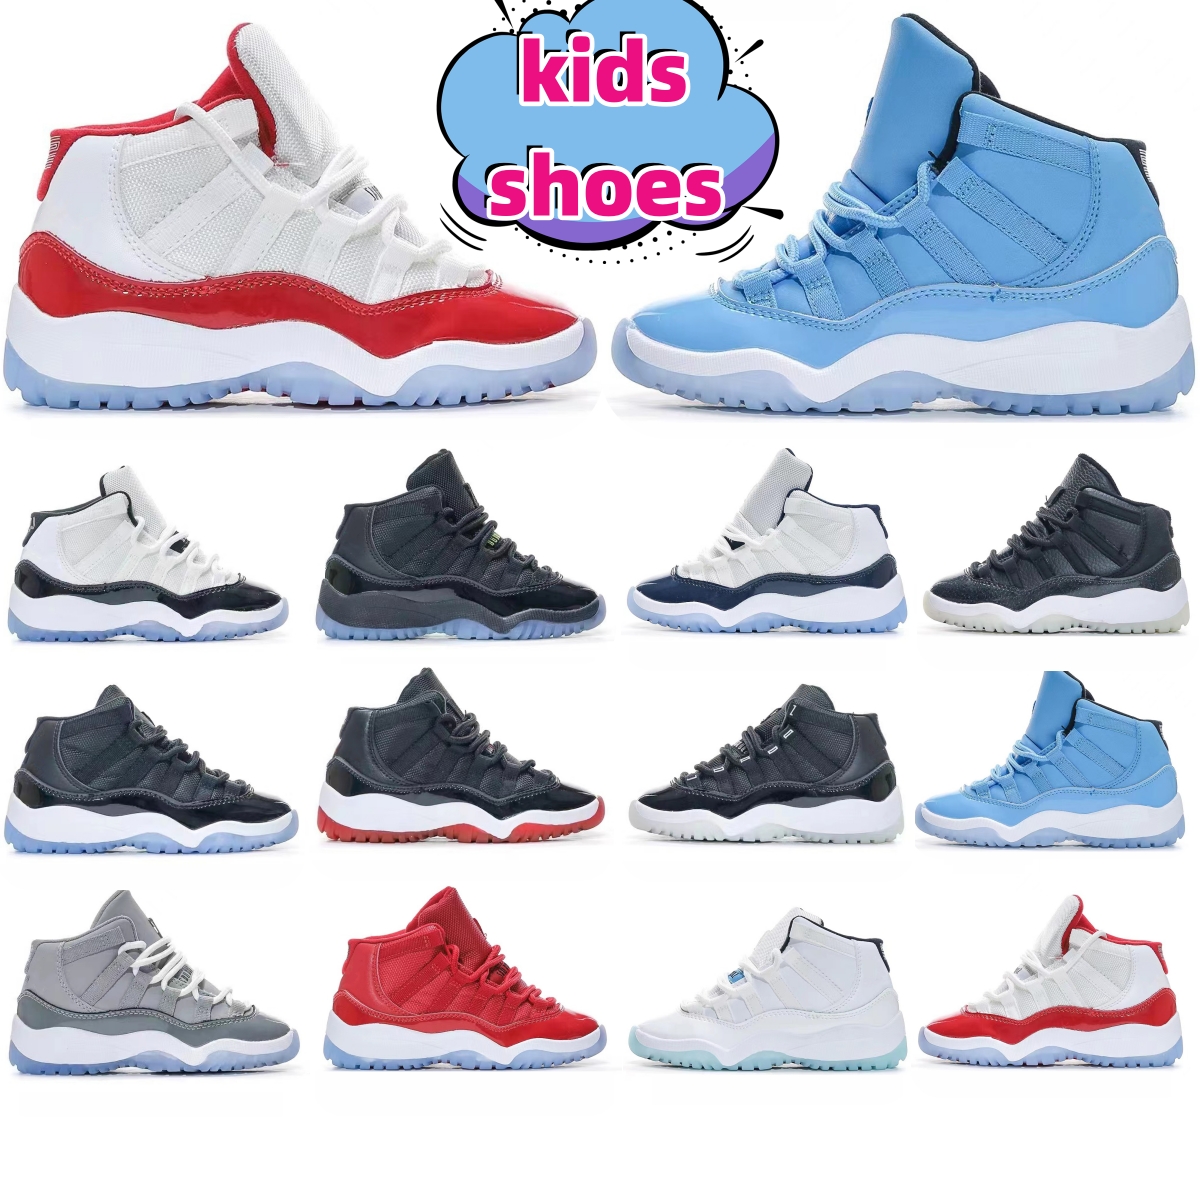 

Cool Grey 11s Kids Basketball Shoes Gamma Blue Jubilee 25th Anniversary Space Jam Infant Big Boys Girls Bred Sneakers Children's Trainers 4, Separates